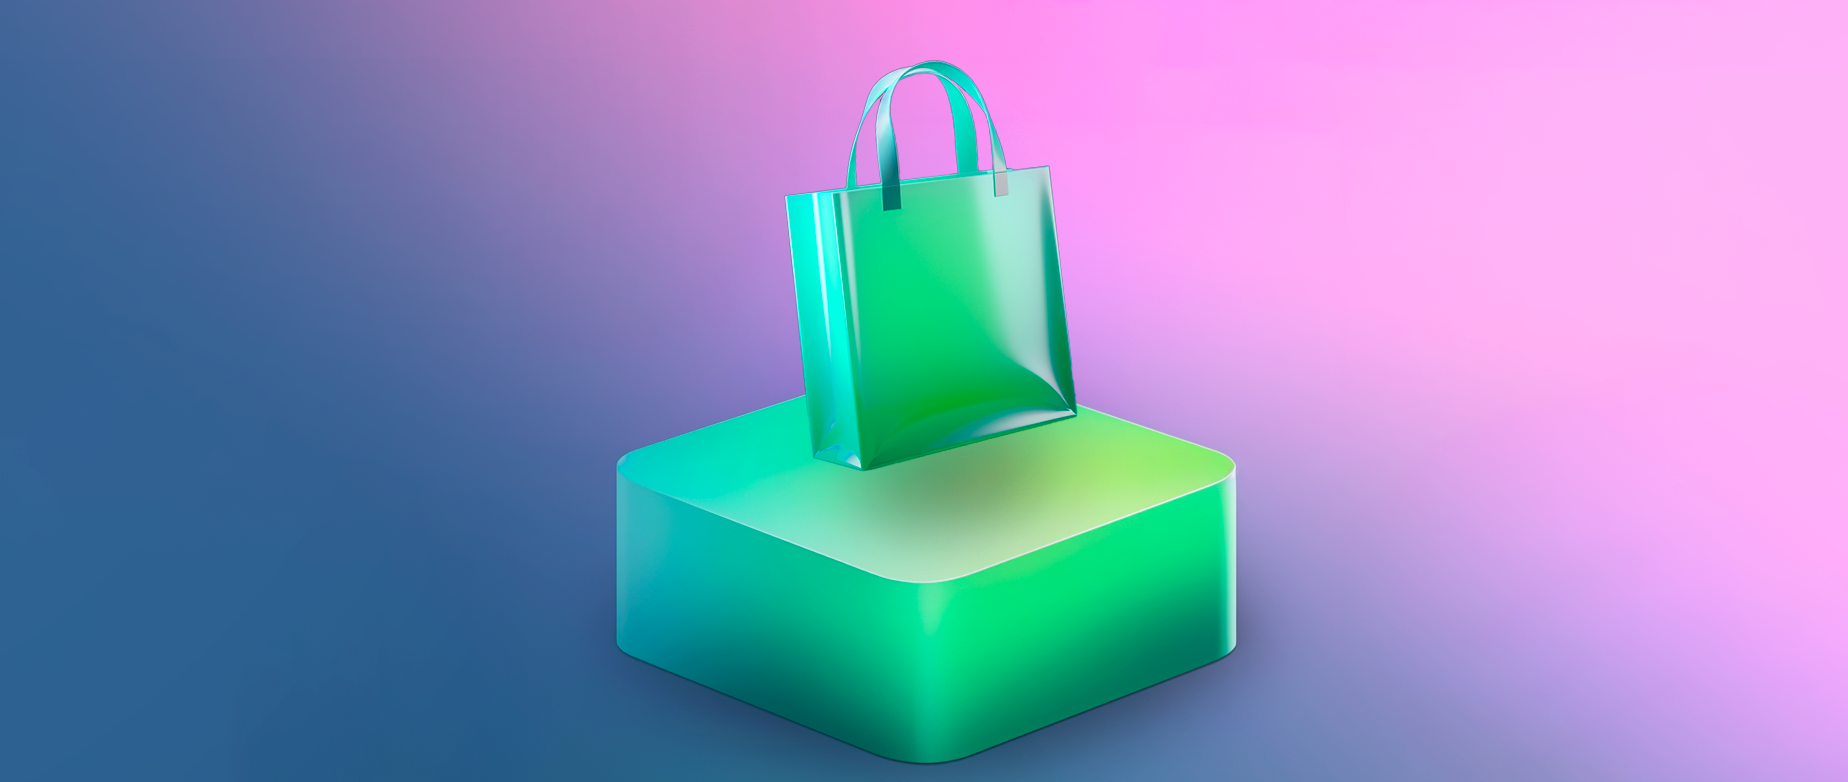 3D icon of a shopping bag on a plinth representing ecommerce platforms for small businesses.